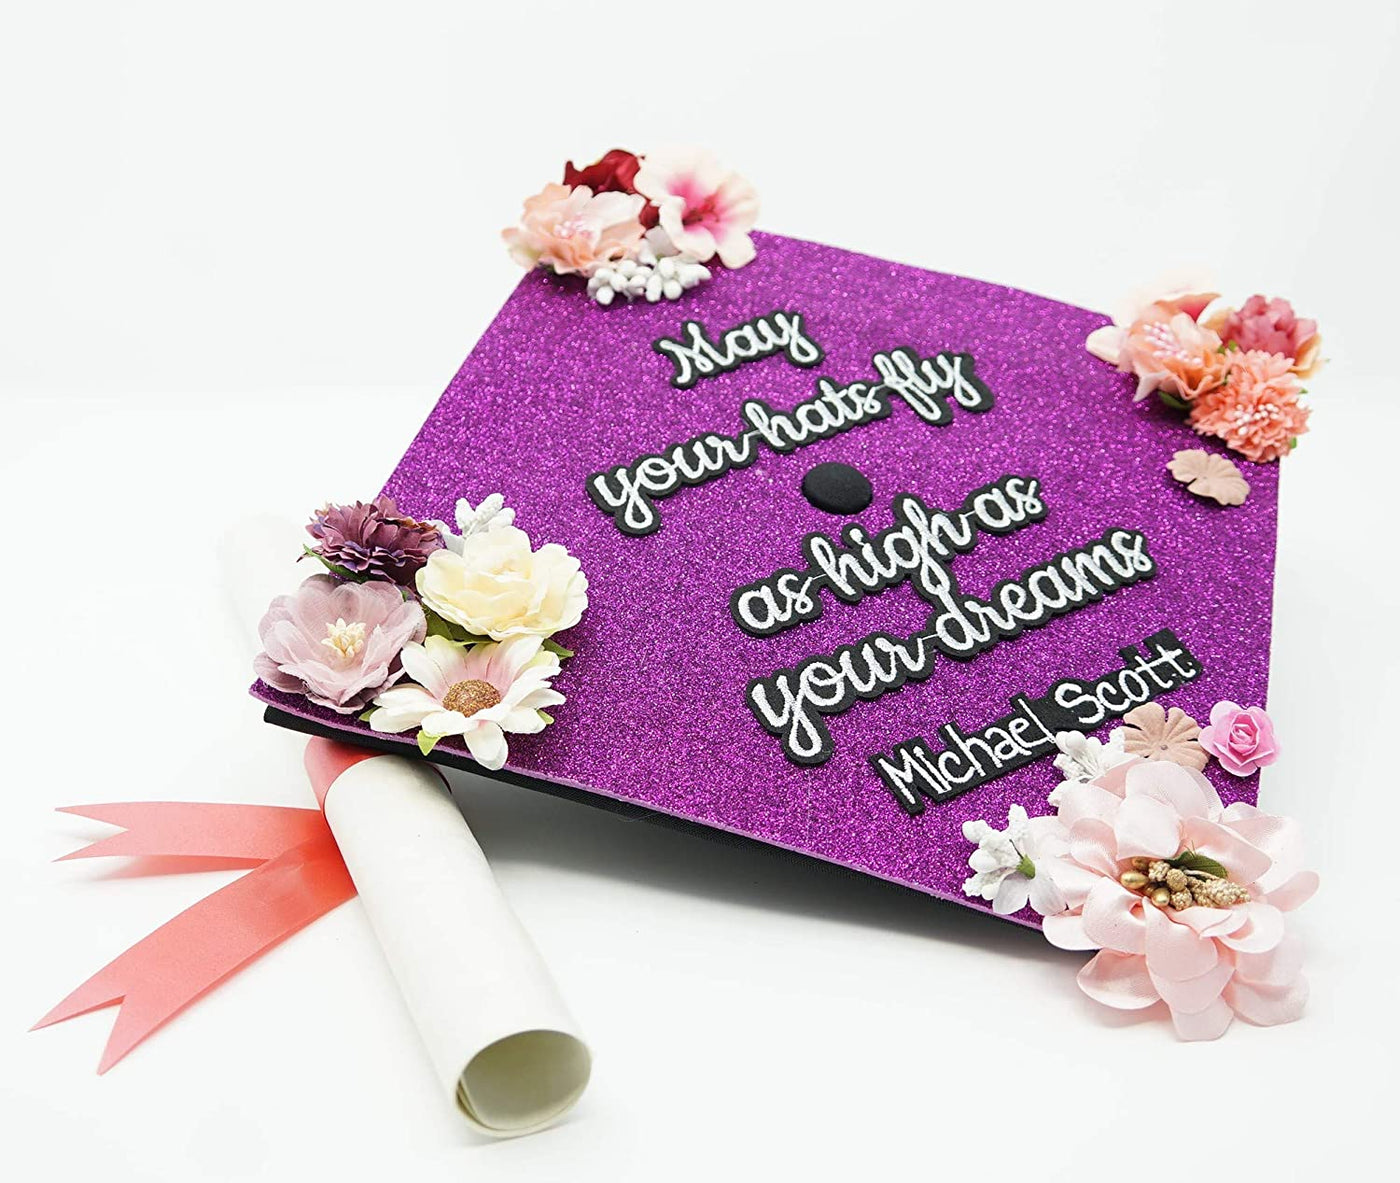 Handmade Graduation Cap Topper, Graduation Cap Decorations, May Your Hats Fly As High As Your Dreams